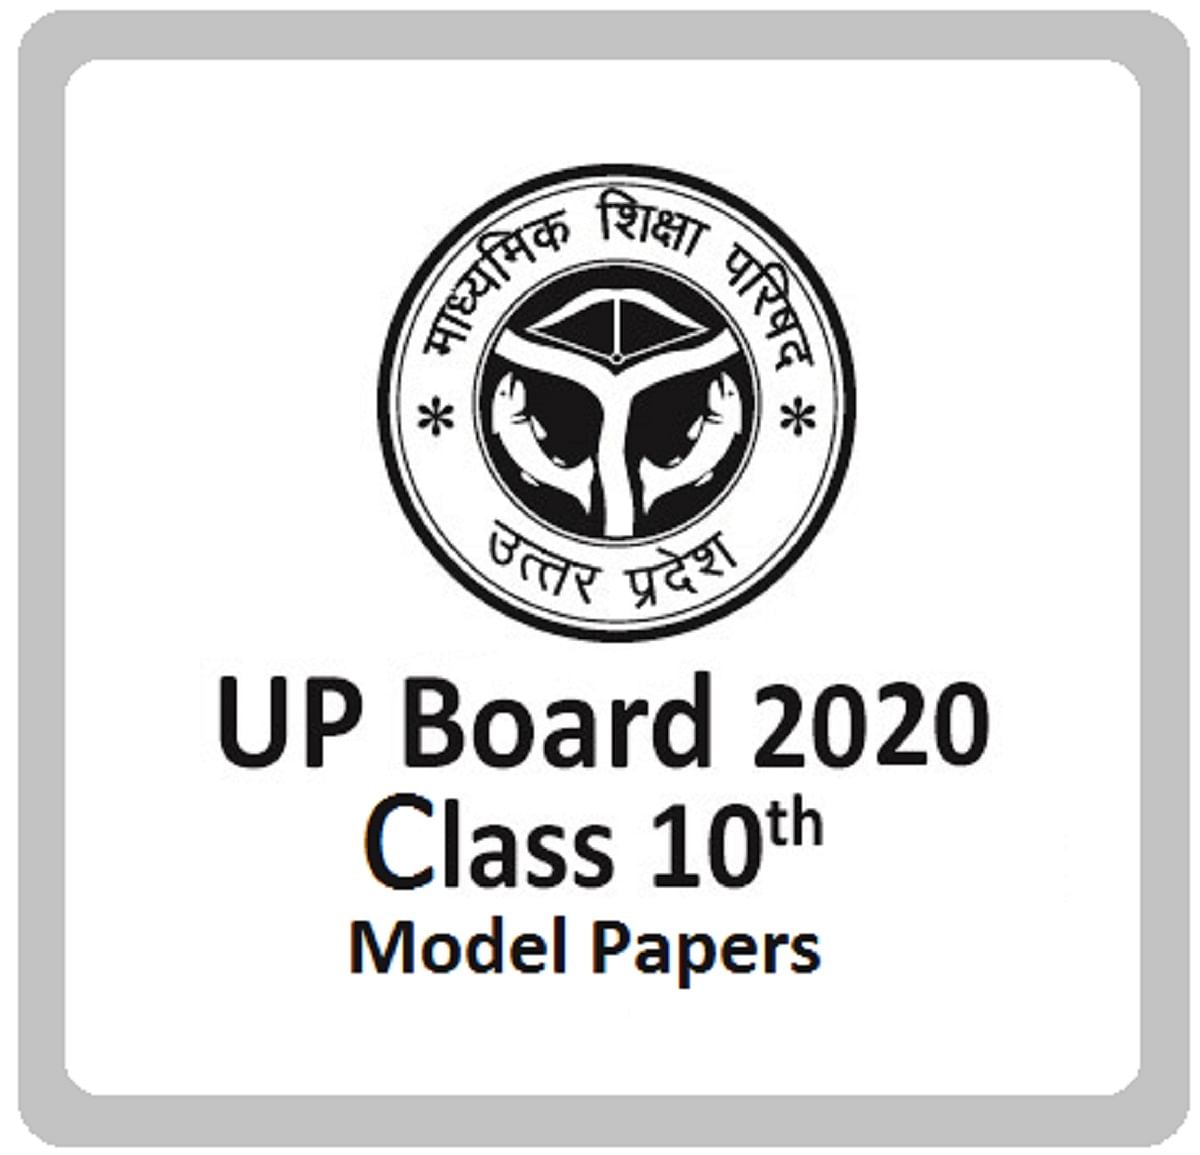 UP Board 2020: Model Paper for Class 10th English Exam